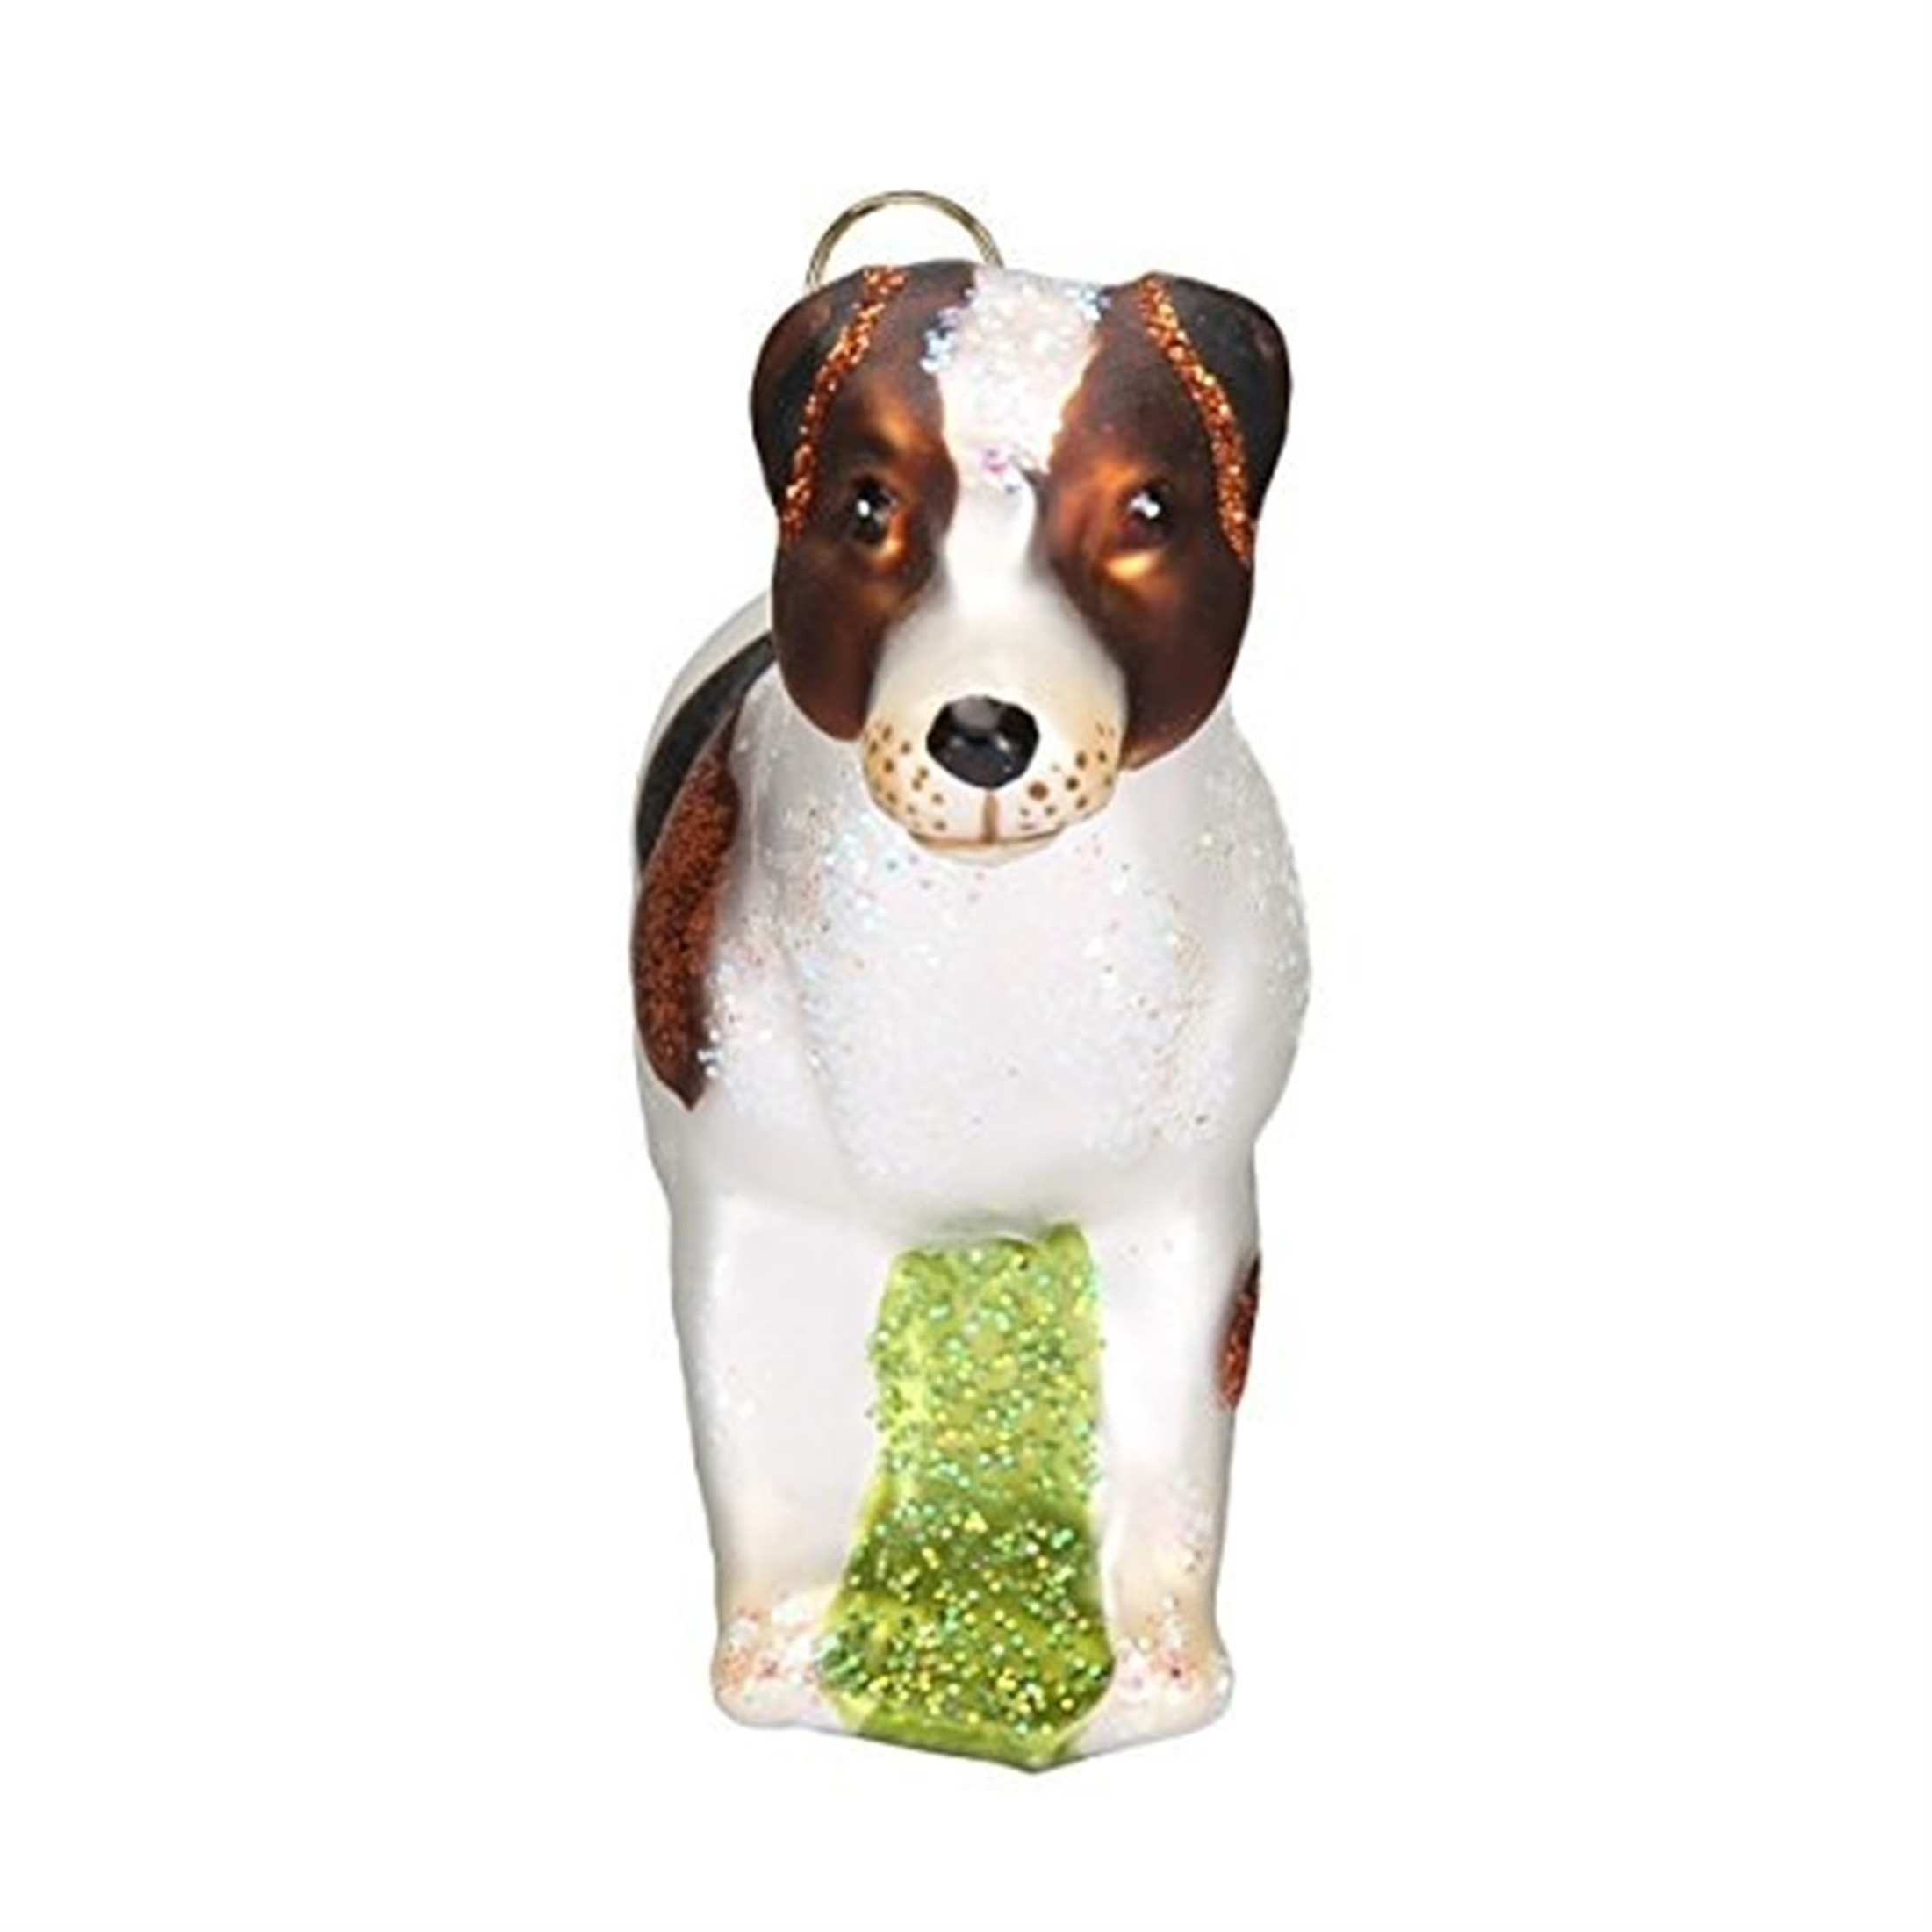 Old World Christmas Glass Blown Ornament, Jack Russell Terrier (With OWC Gift Box)